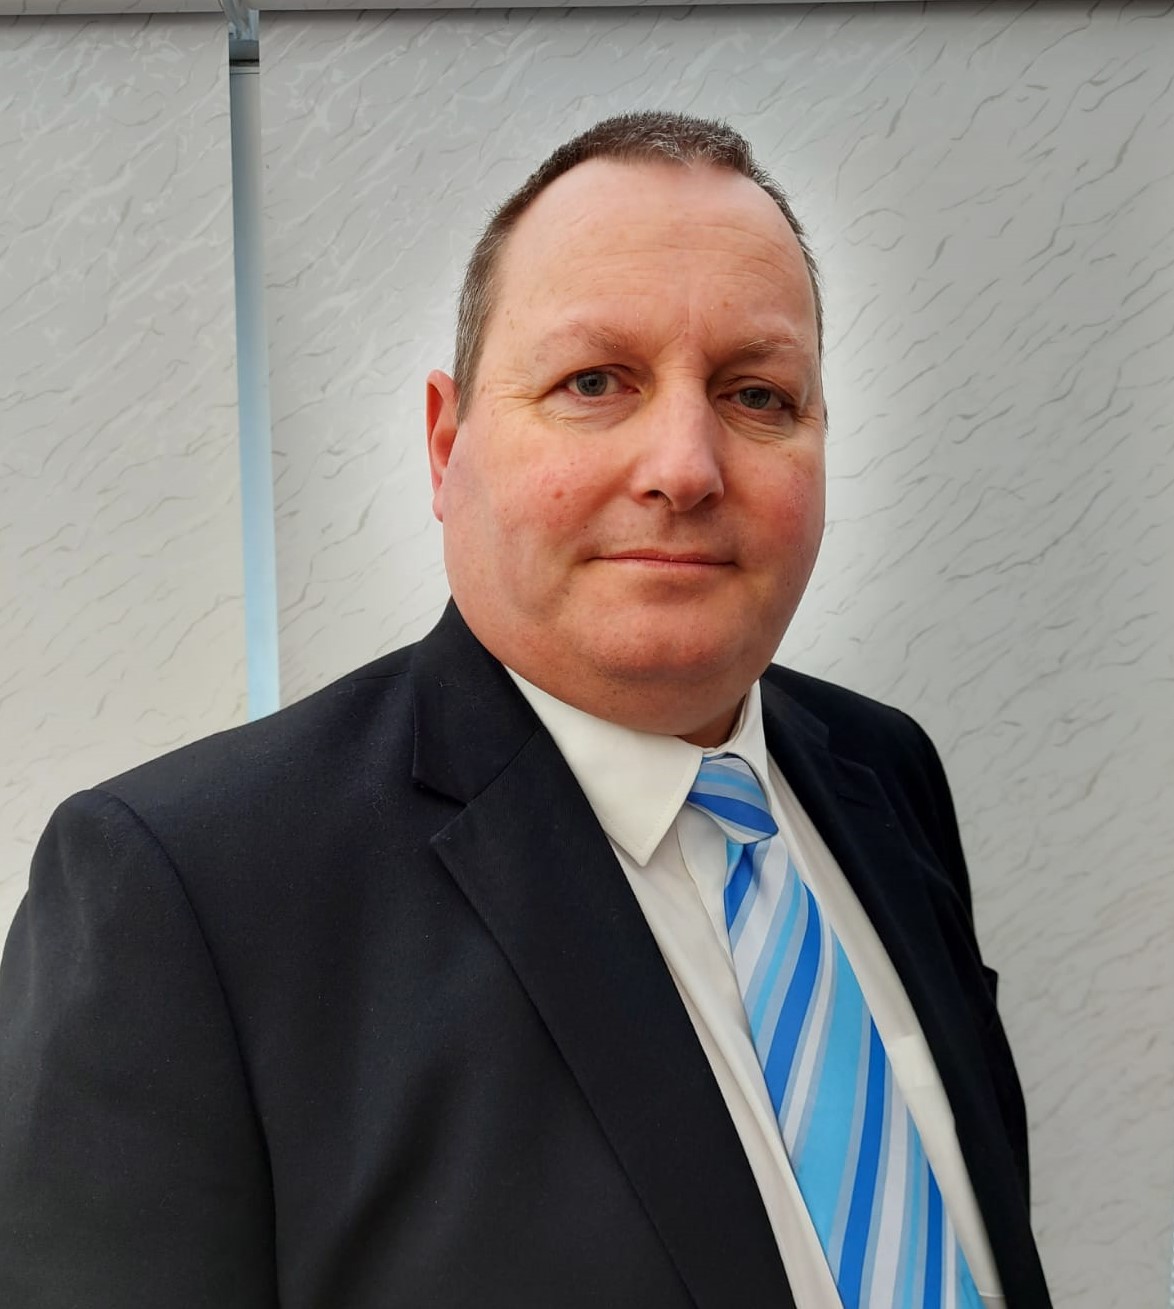 PCL appoints new national sales manager